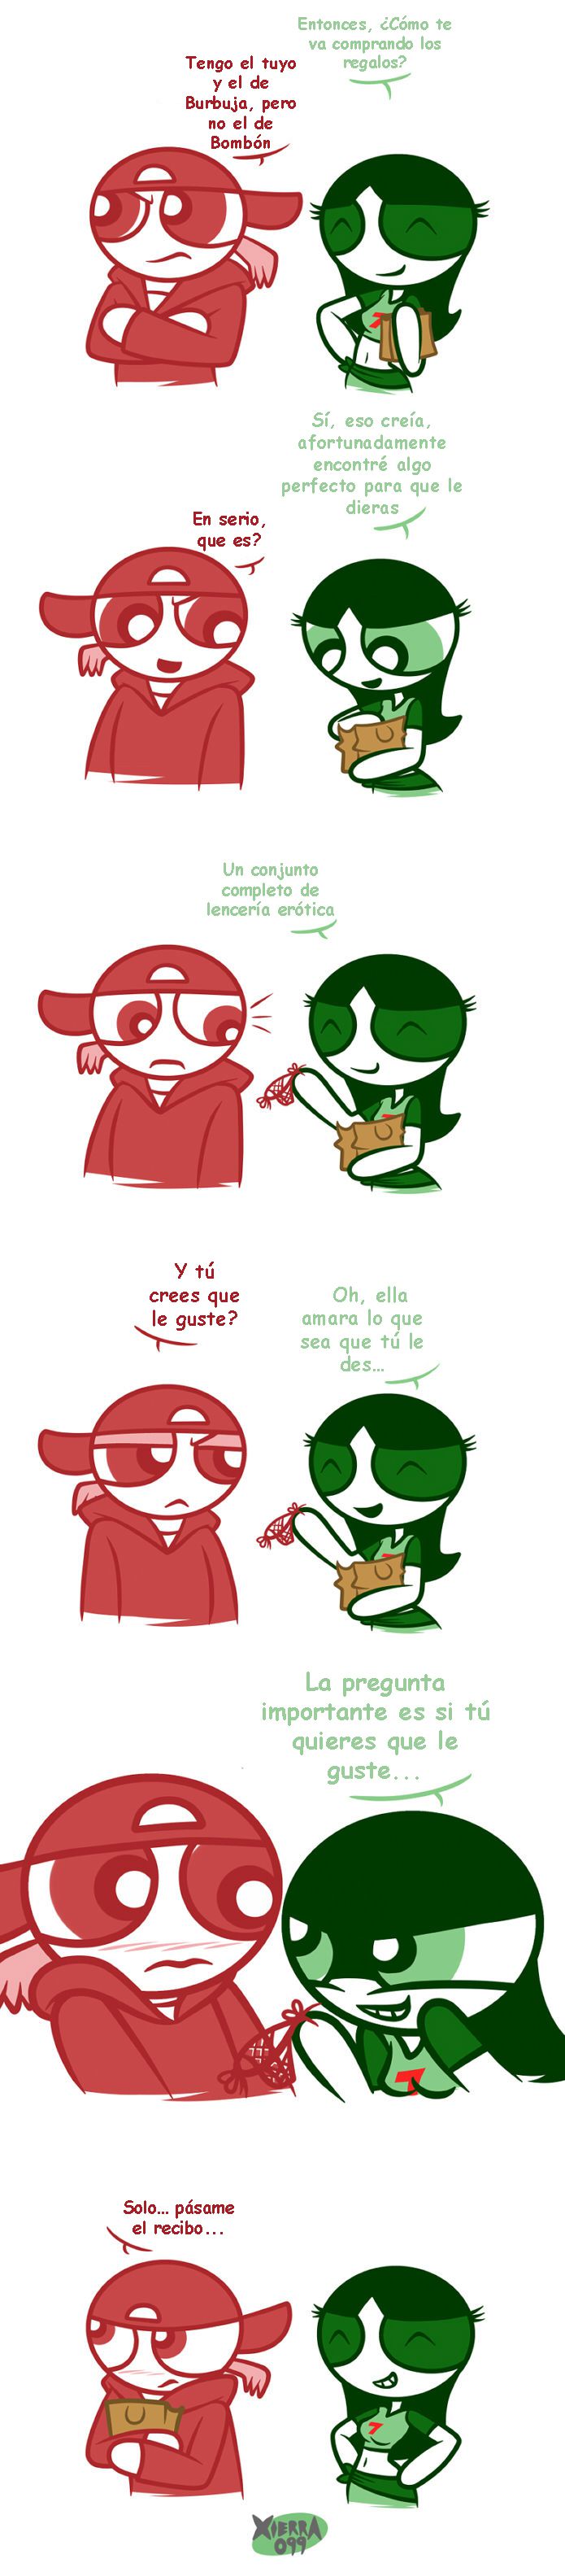 [Xierra099] PPG Strips [Ongoing] Spanish 21